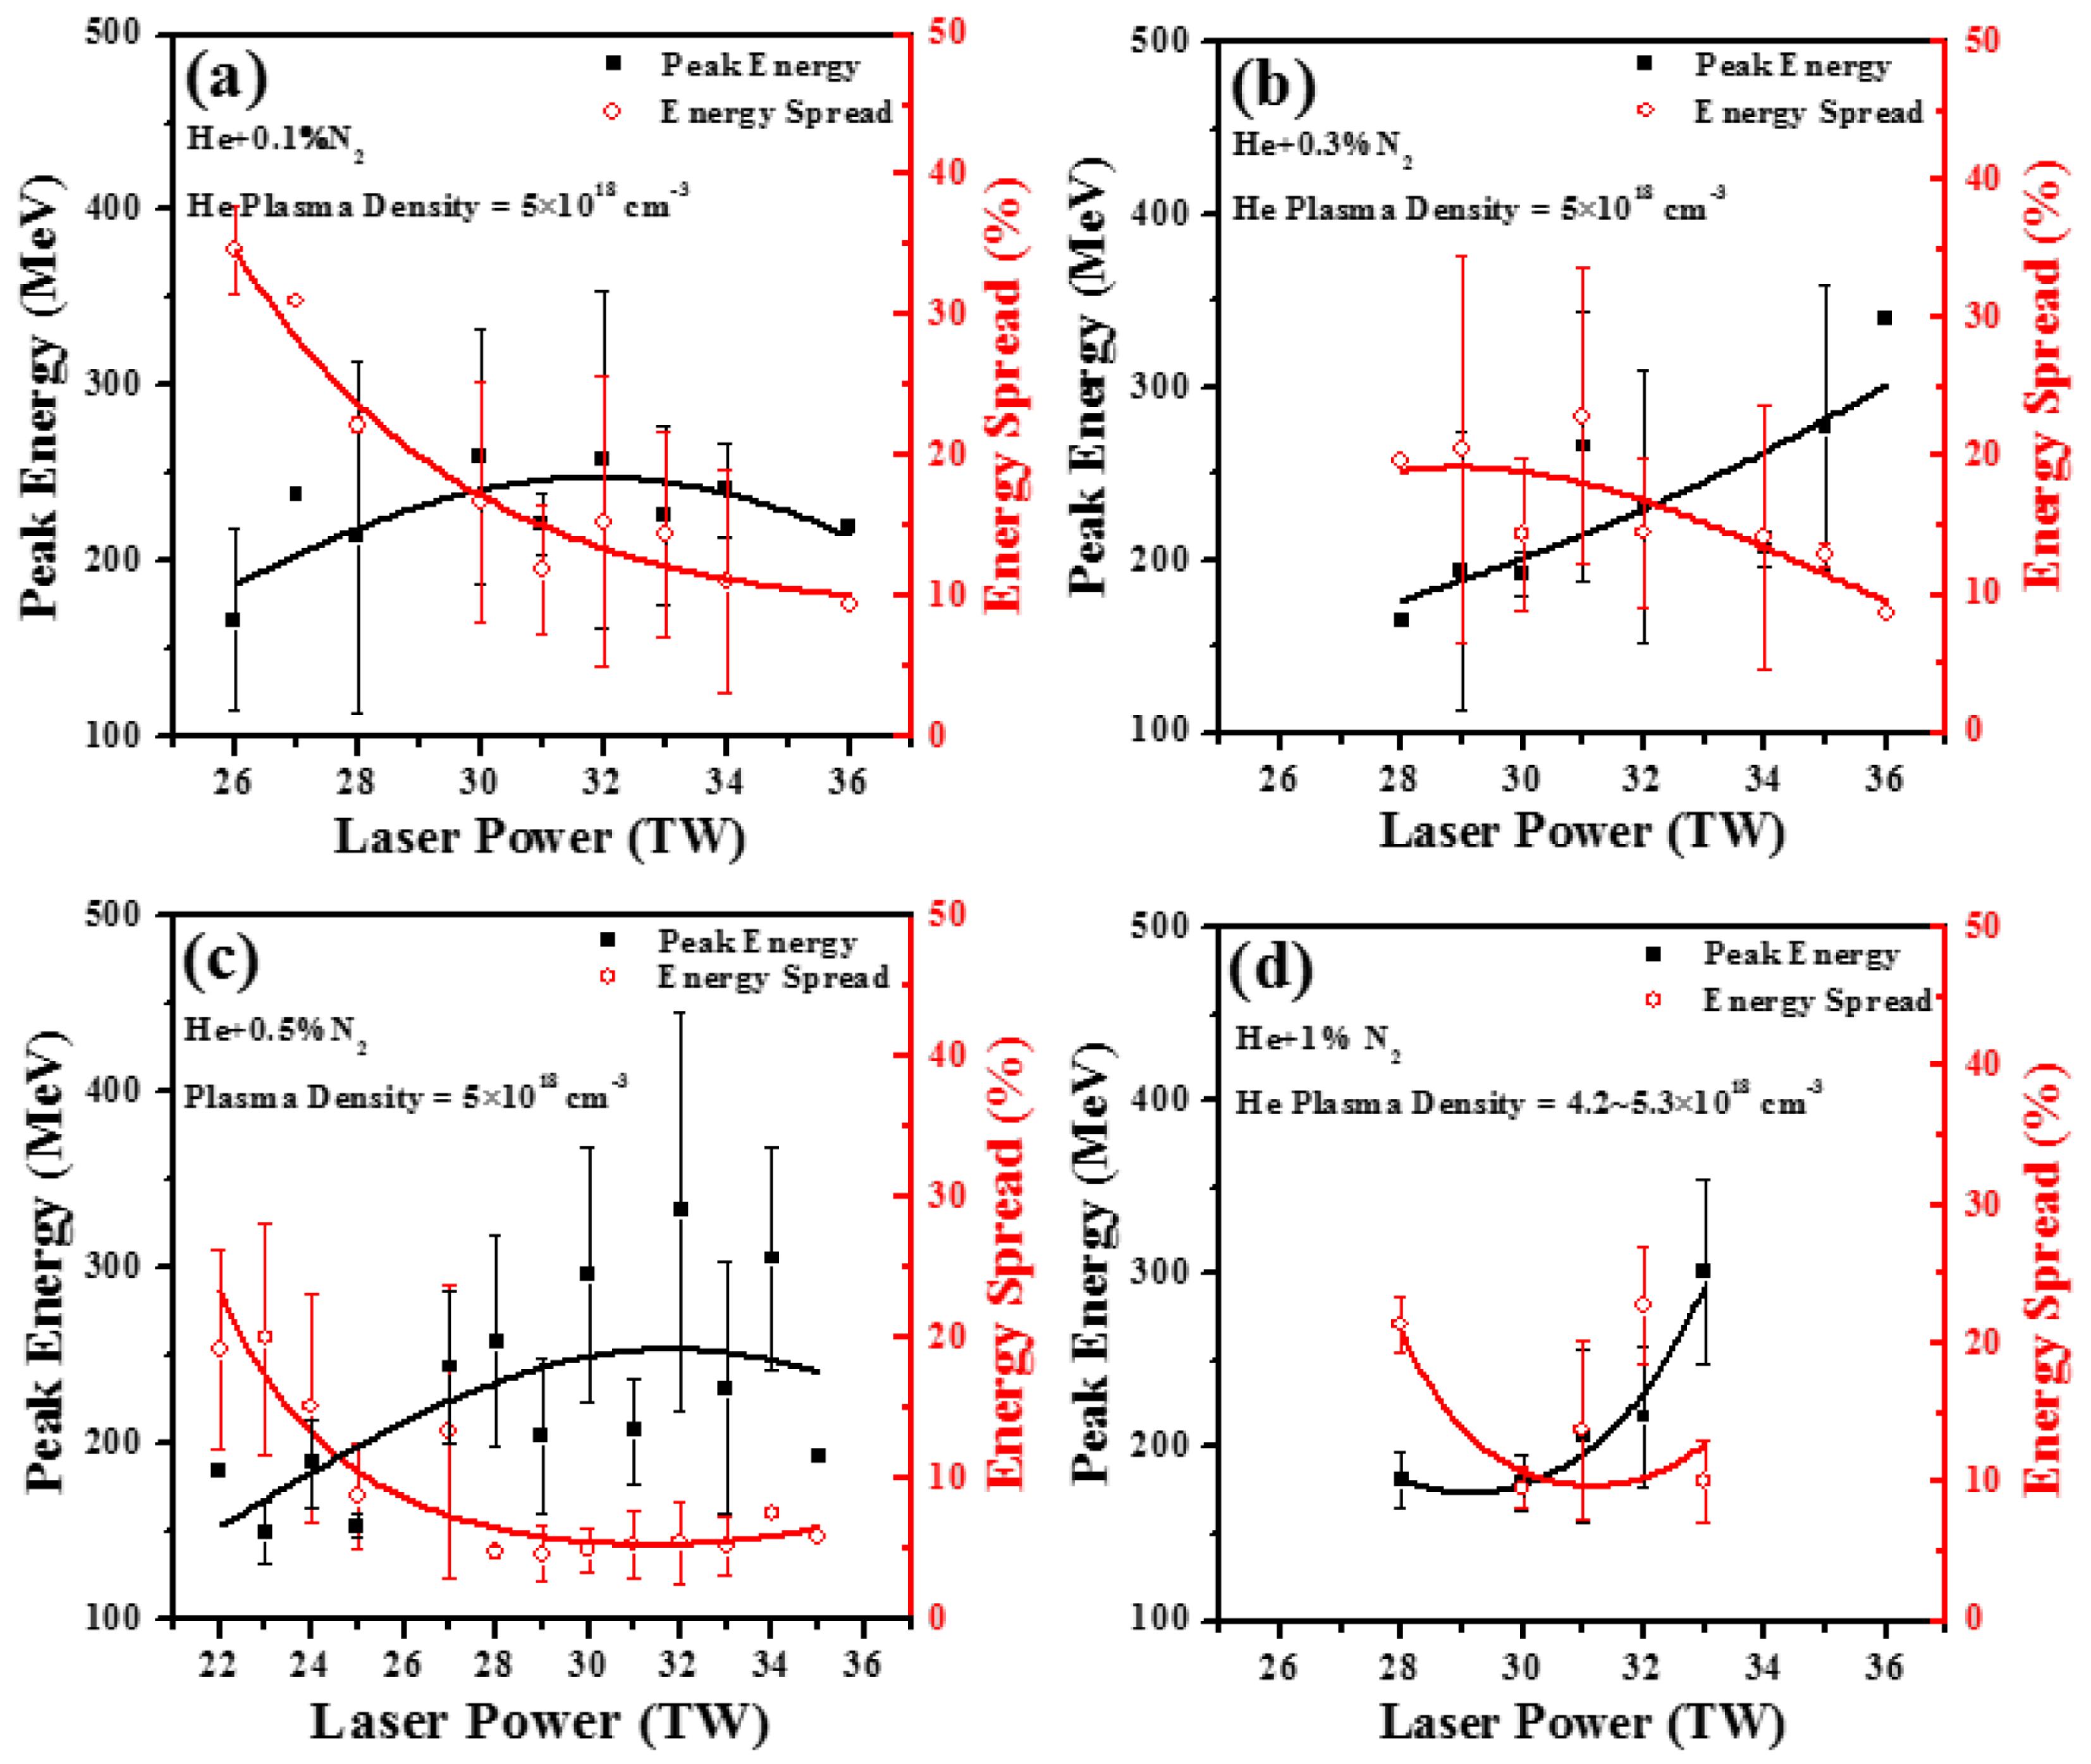 Monoenergetic peak energy and FWHM energy spread of electron beams as a function of laser power for four different concentrations of nitrogen–helium gas mixture targets: (a) 0.1% $\text{N}_{2}$ mixed in 99.9% of He, (b) 0.3% $\text{N}_{2}$ mixed in 99.7% of He, (c) 0.5% $\text{N}_{2}$ mixed in 99.5% of He, and (d) 1% $\text{N}_{2}$ mixed in 99% of He. The helium plasma density is $5.0\times 10^{18}~\text{cm}^{-3}$ in all plots, expect for the case of (d) where the density range is slightly different. The unmatched laser–plasma parameters for all points in this graphs are in the range of $k_{p}w_{0}\sim 10.8{-}12.1$ and $2(a_{0})^{1/2}\sim 1.9{-}2.2$.